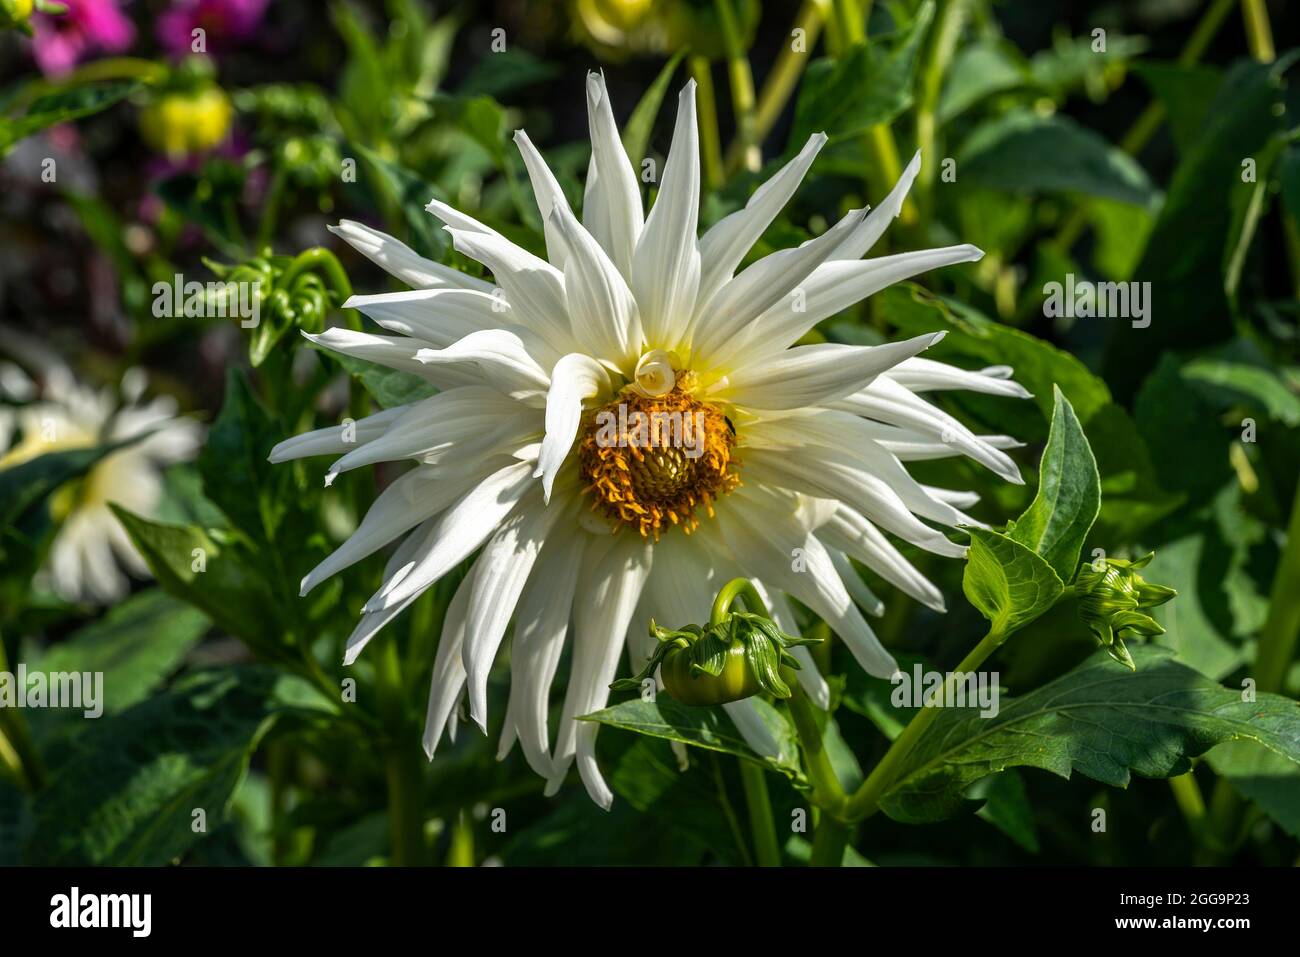 Dahlia 'My Love' a summer autumn flowering plant with a white summertime flower which is a semi cactus variety, stock photo image Stock Photo